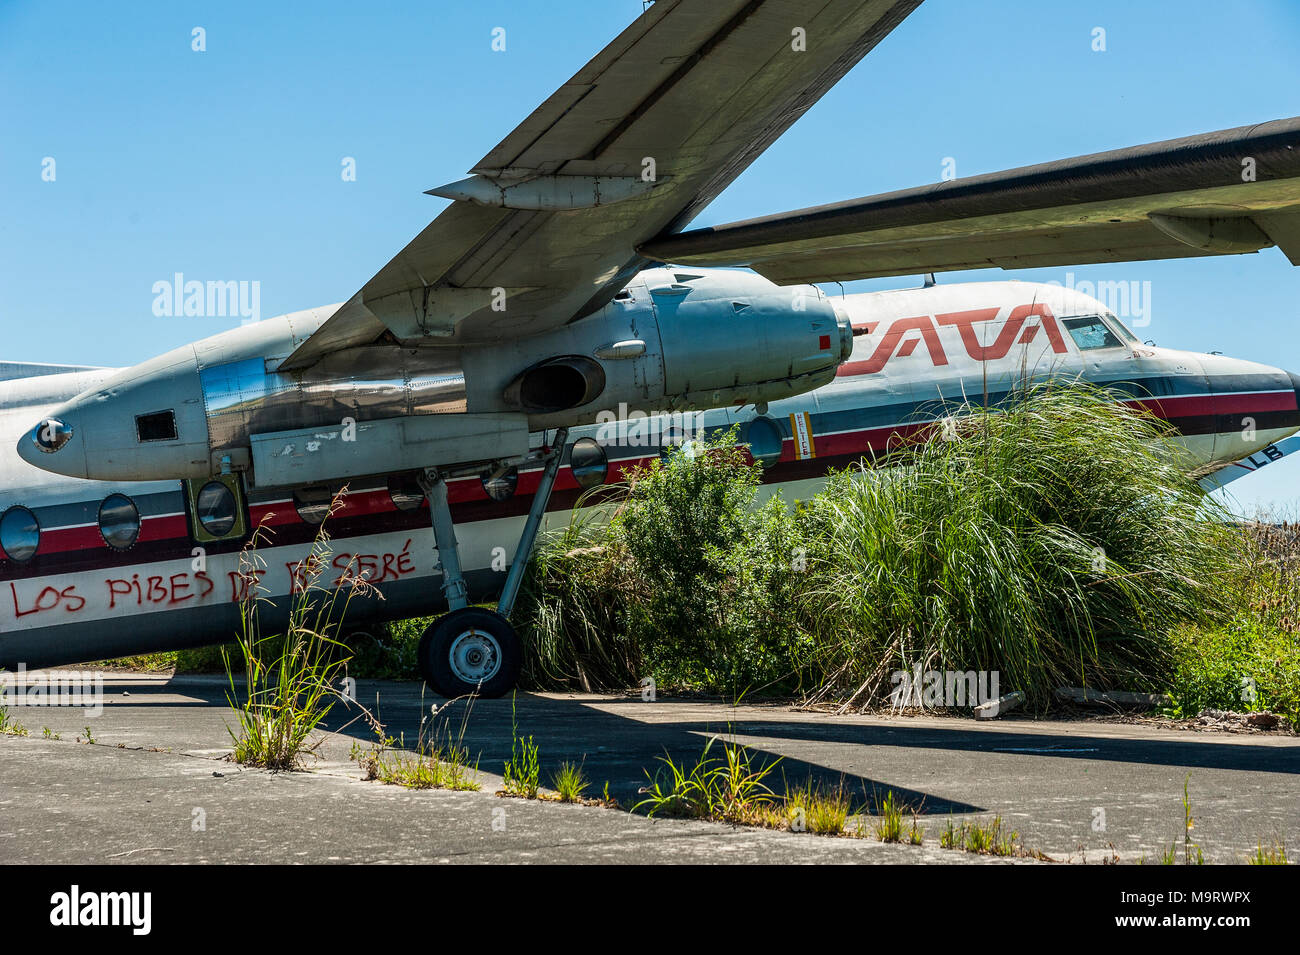 Nature taking over abandoned Fairchild airplanes of CATA Linea Aerea at the Moron Airport in Buenos Aires, underwing and motor Stock Photo